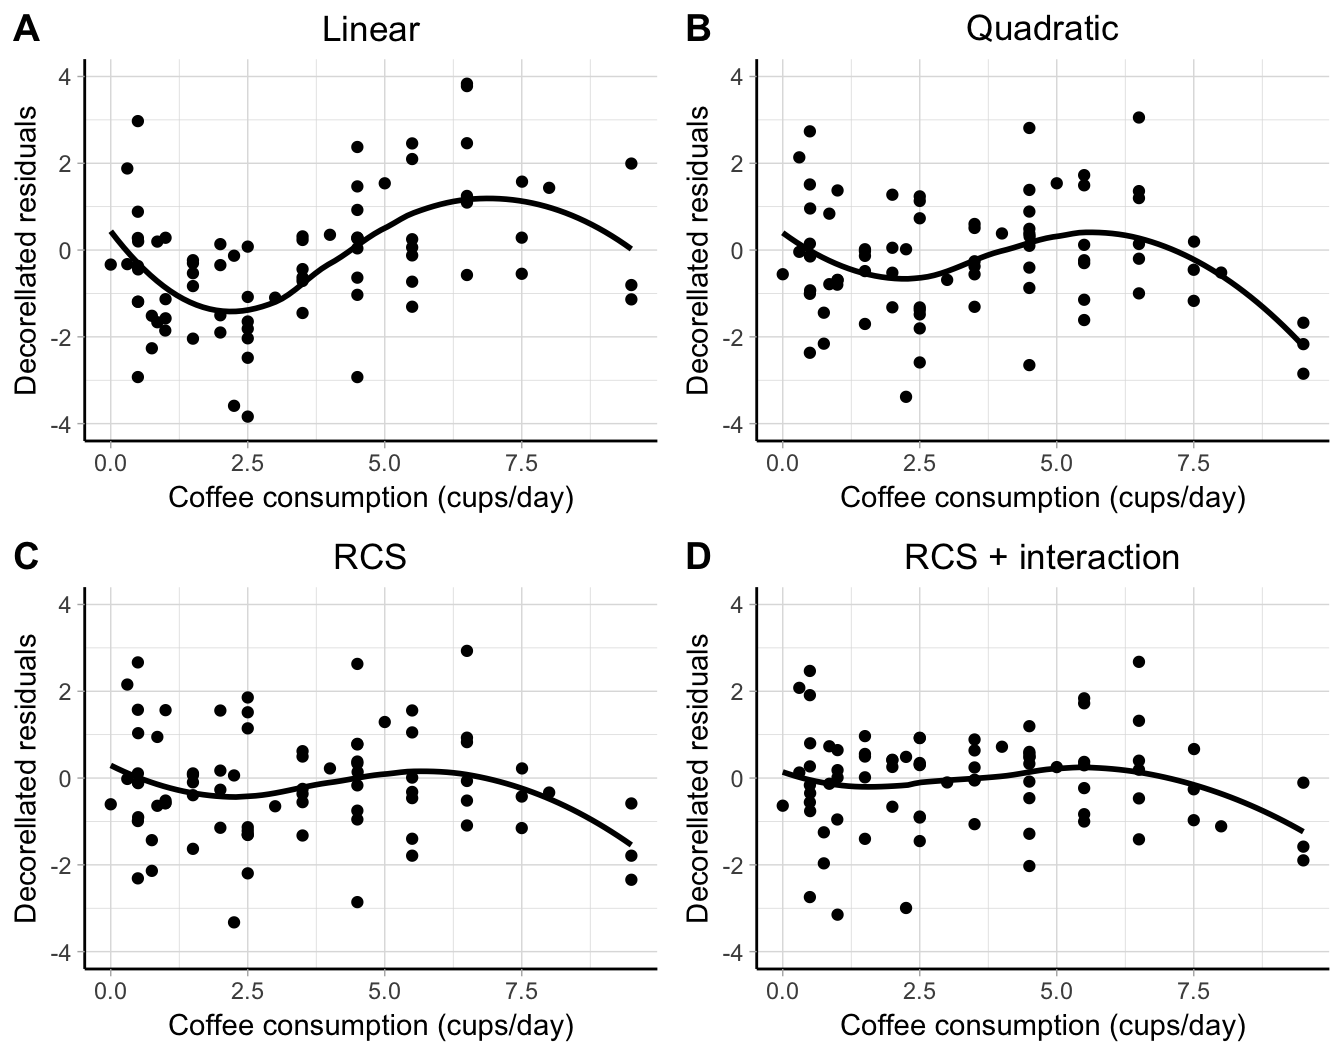 Decorrelated residuals versus exposure plots with LOWESS smother for different modelling strategies in a dose--response meta-analysis between coffee consumption and all-cause mortality [@crippa2014coffee].